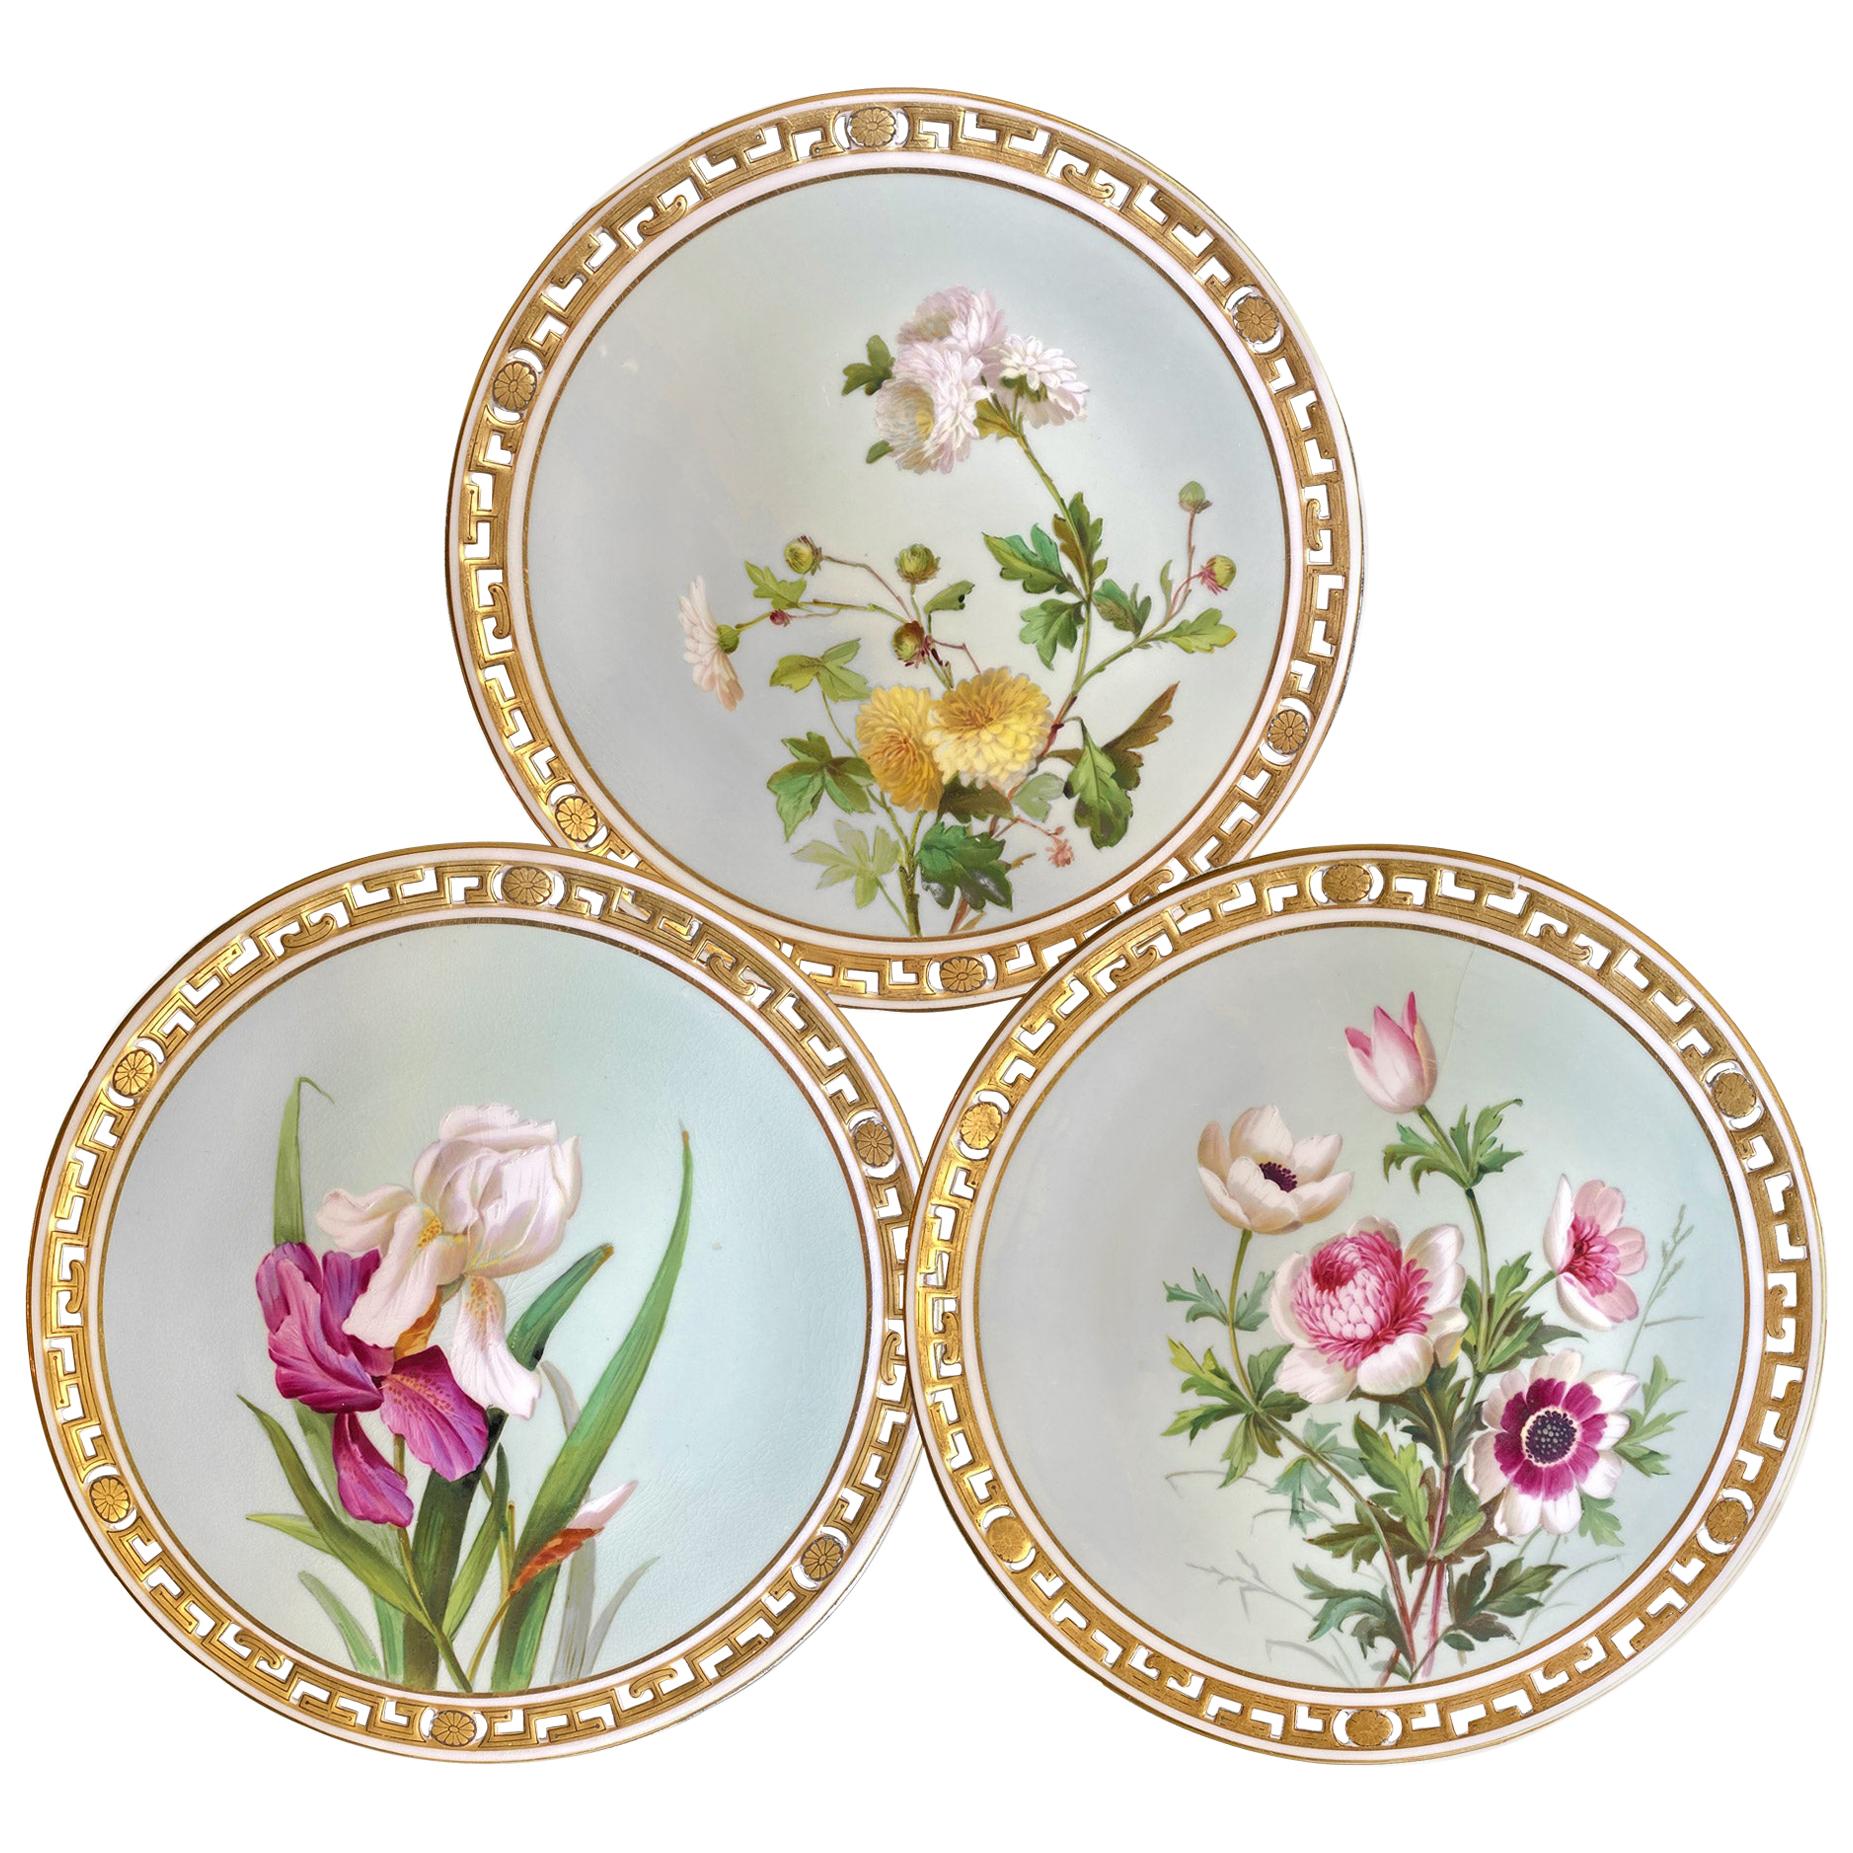 11 Dinner Plates Flowers and Gold, Minton Porcelain, 1874-1884